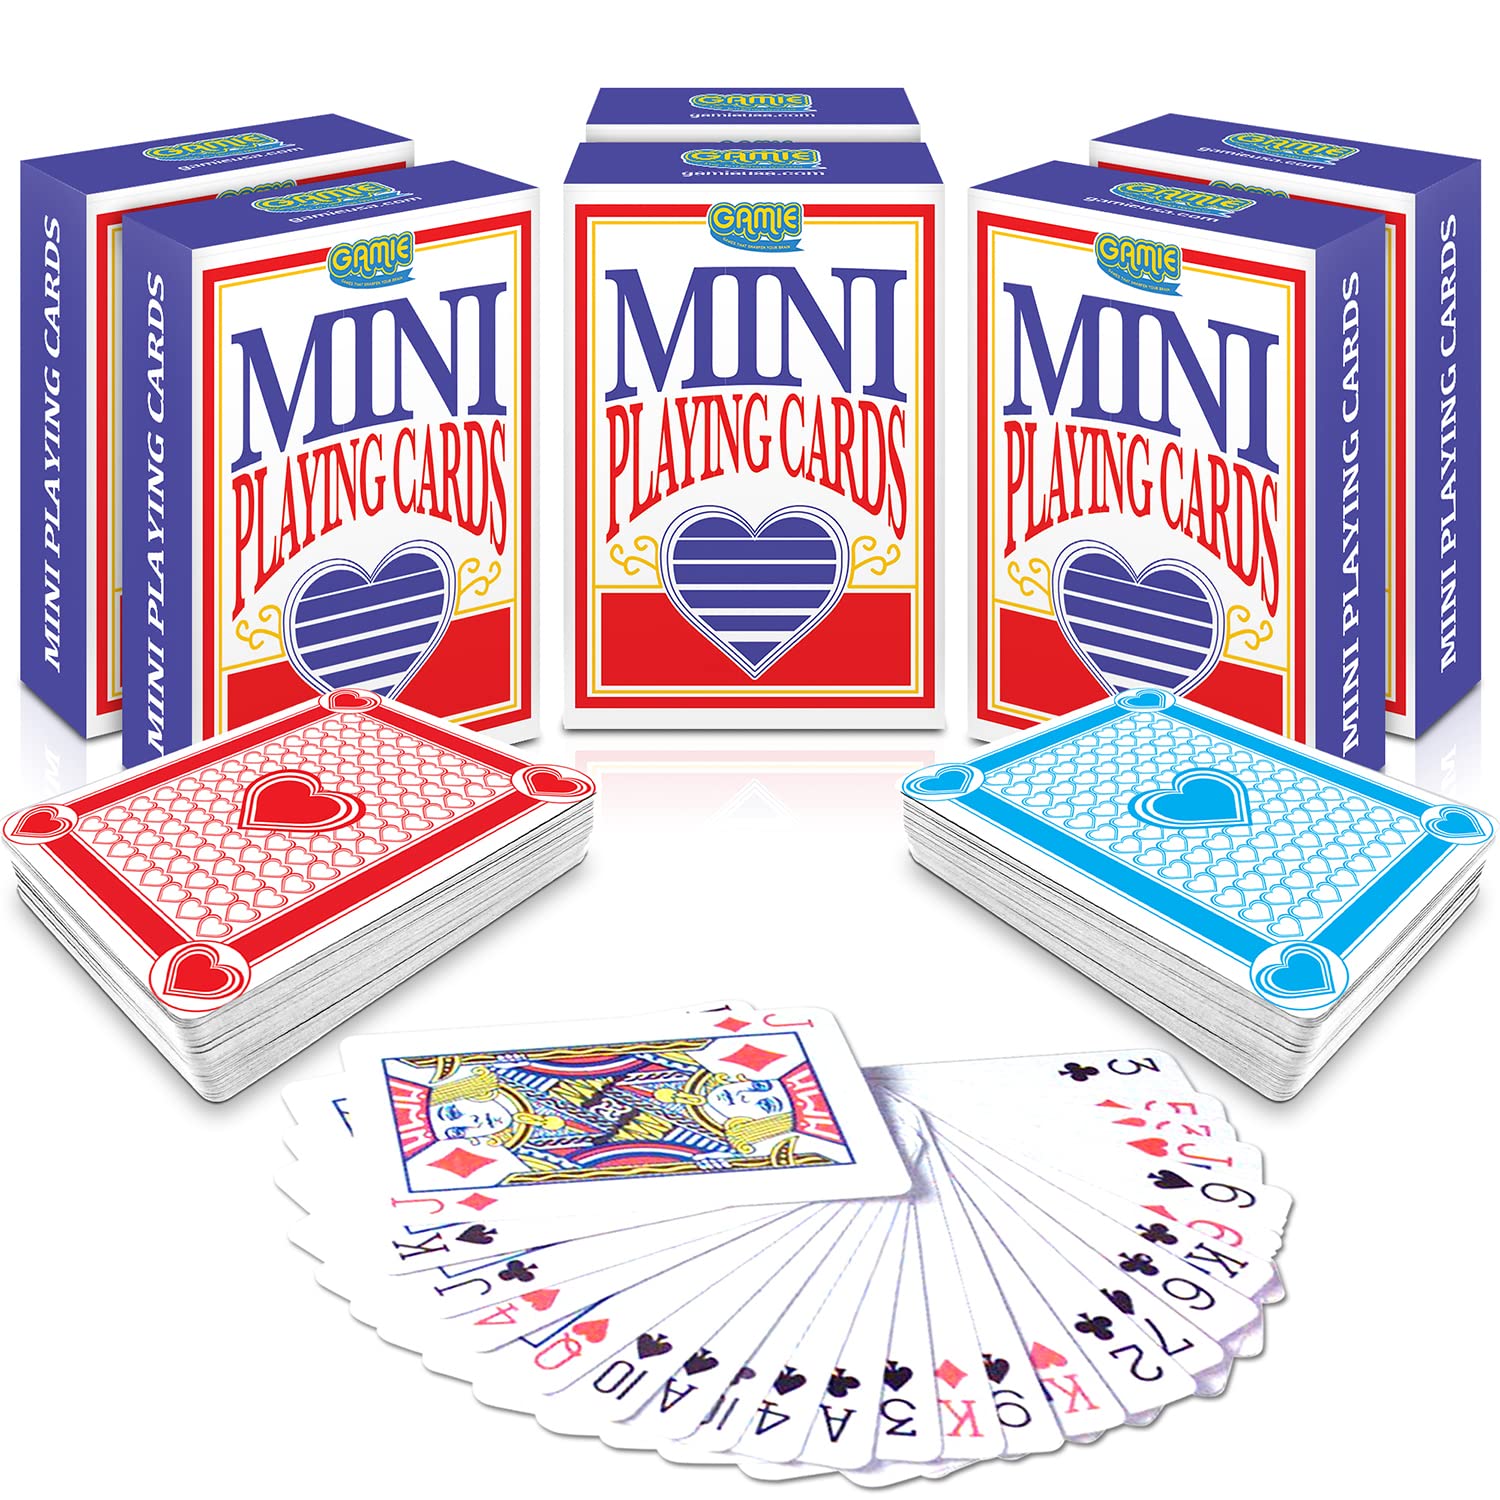 2.5 Inch Mini Playing Cards- Pack of 6 Decks- Miniature Card Set- Small Casino Game Cards for Kids, Men, Women- Novelty Gift, Magic Party Favor for Boys Girls, Decoration Idea